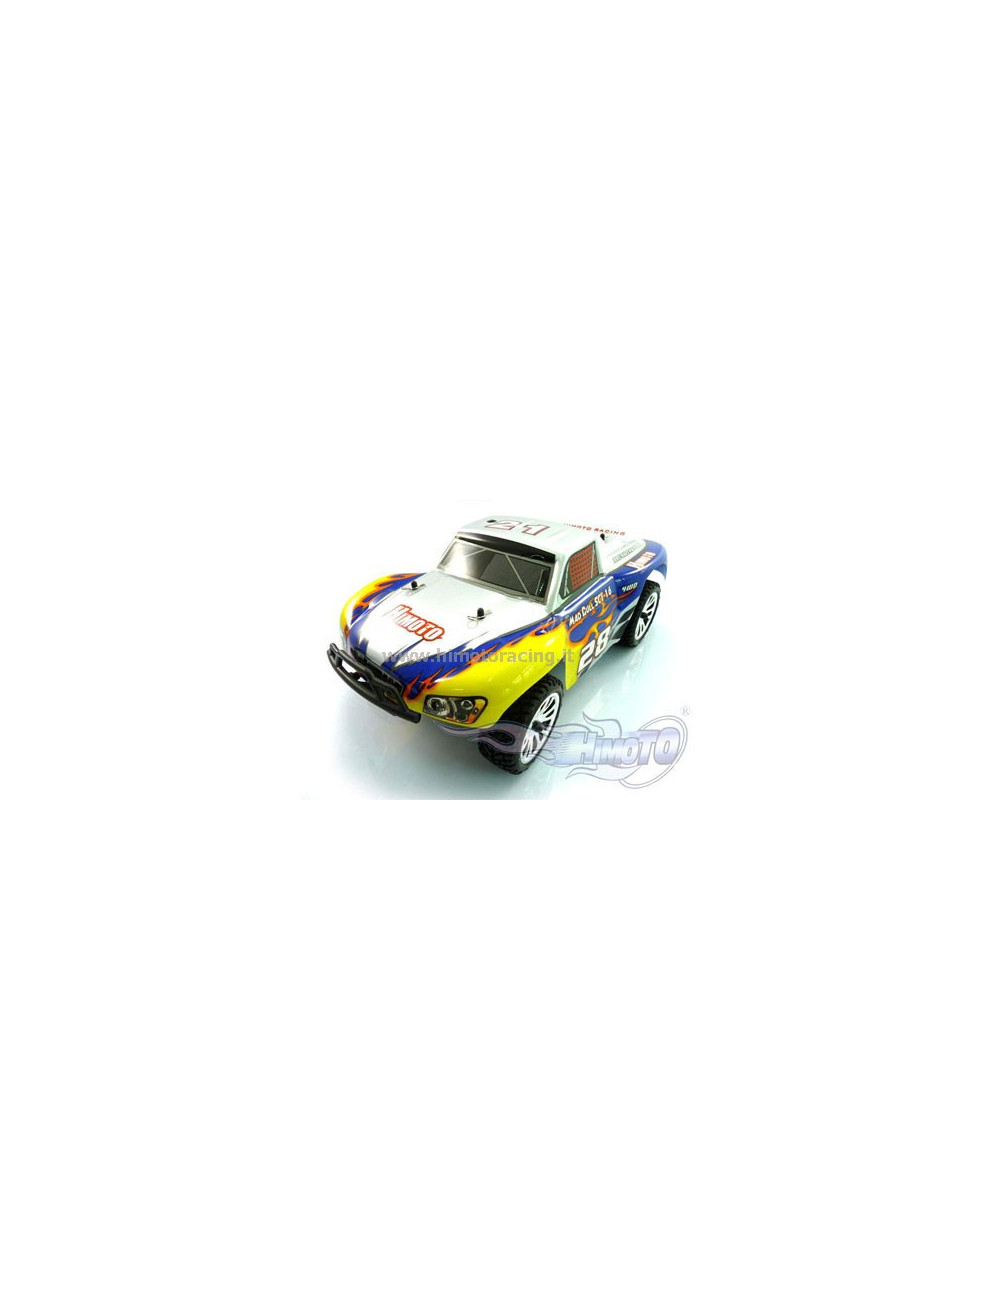 Short Course truck brushless SCT-16 Himoto 1/14